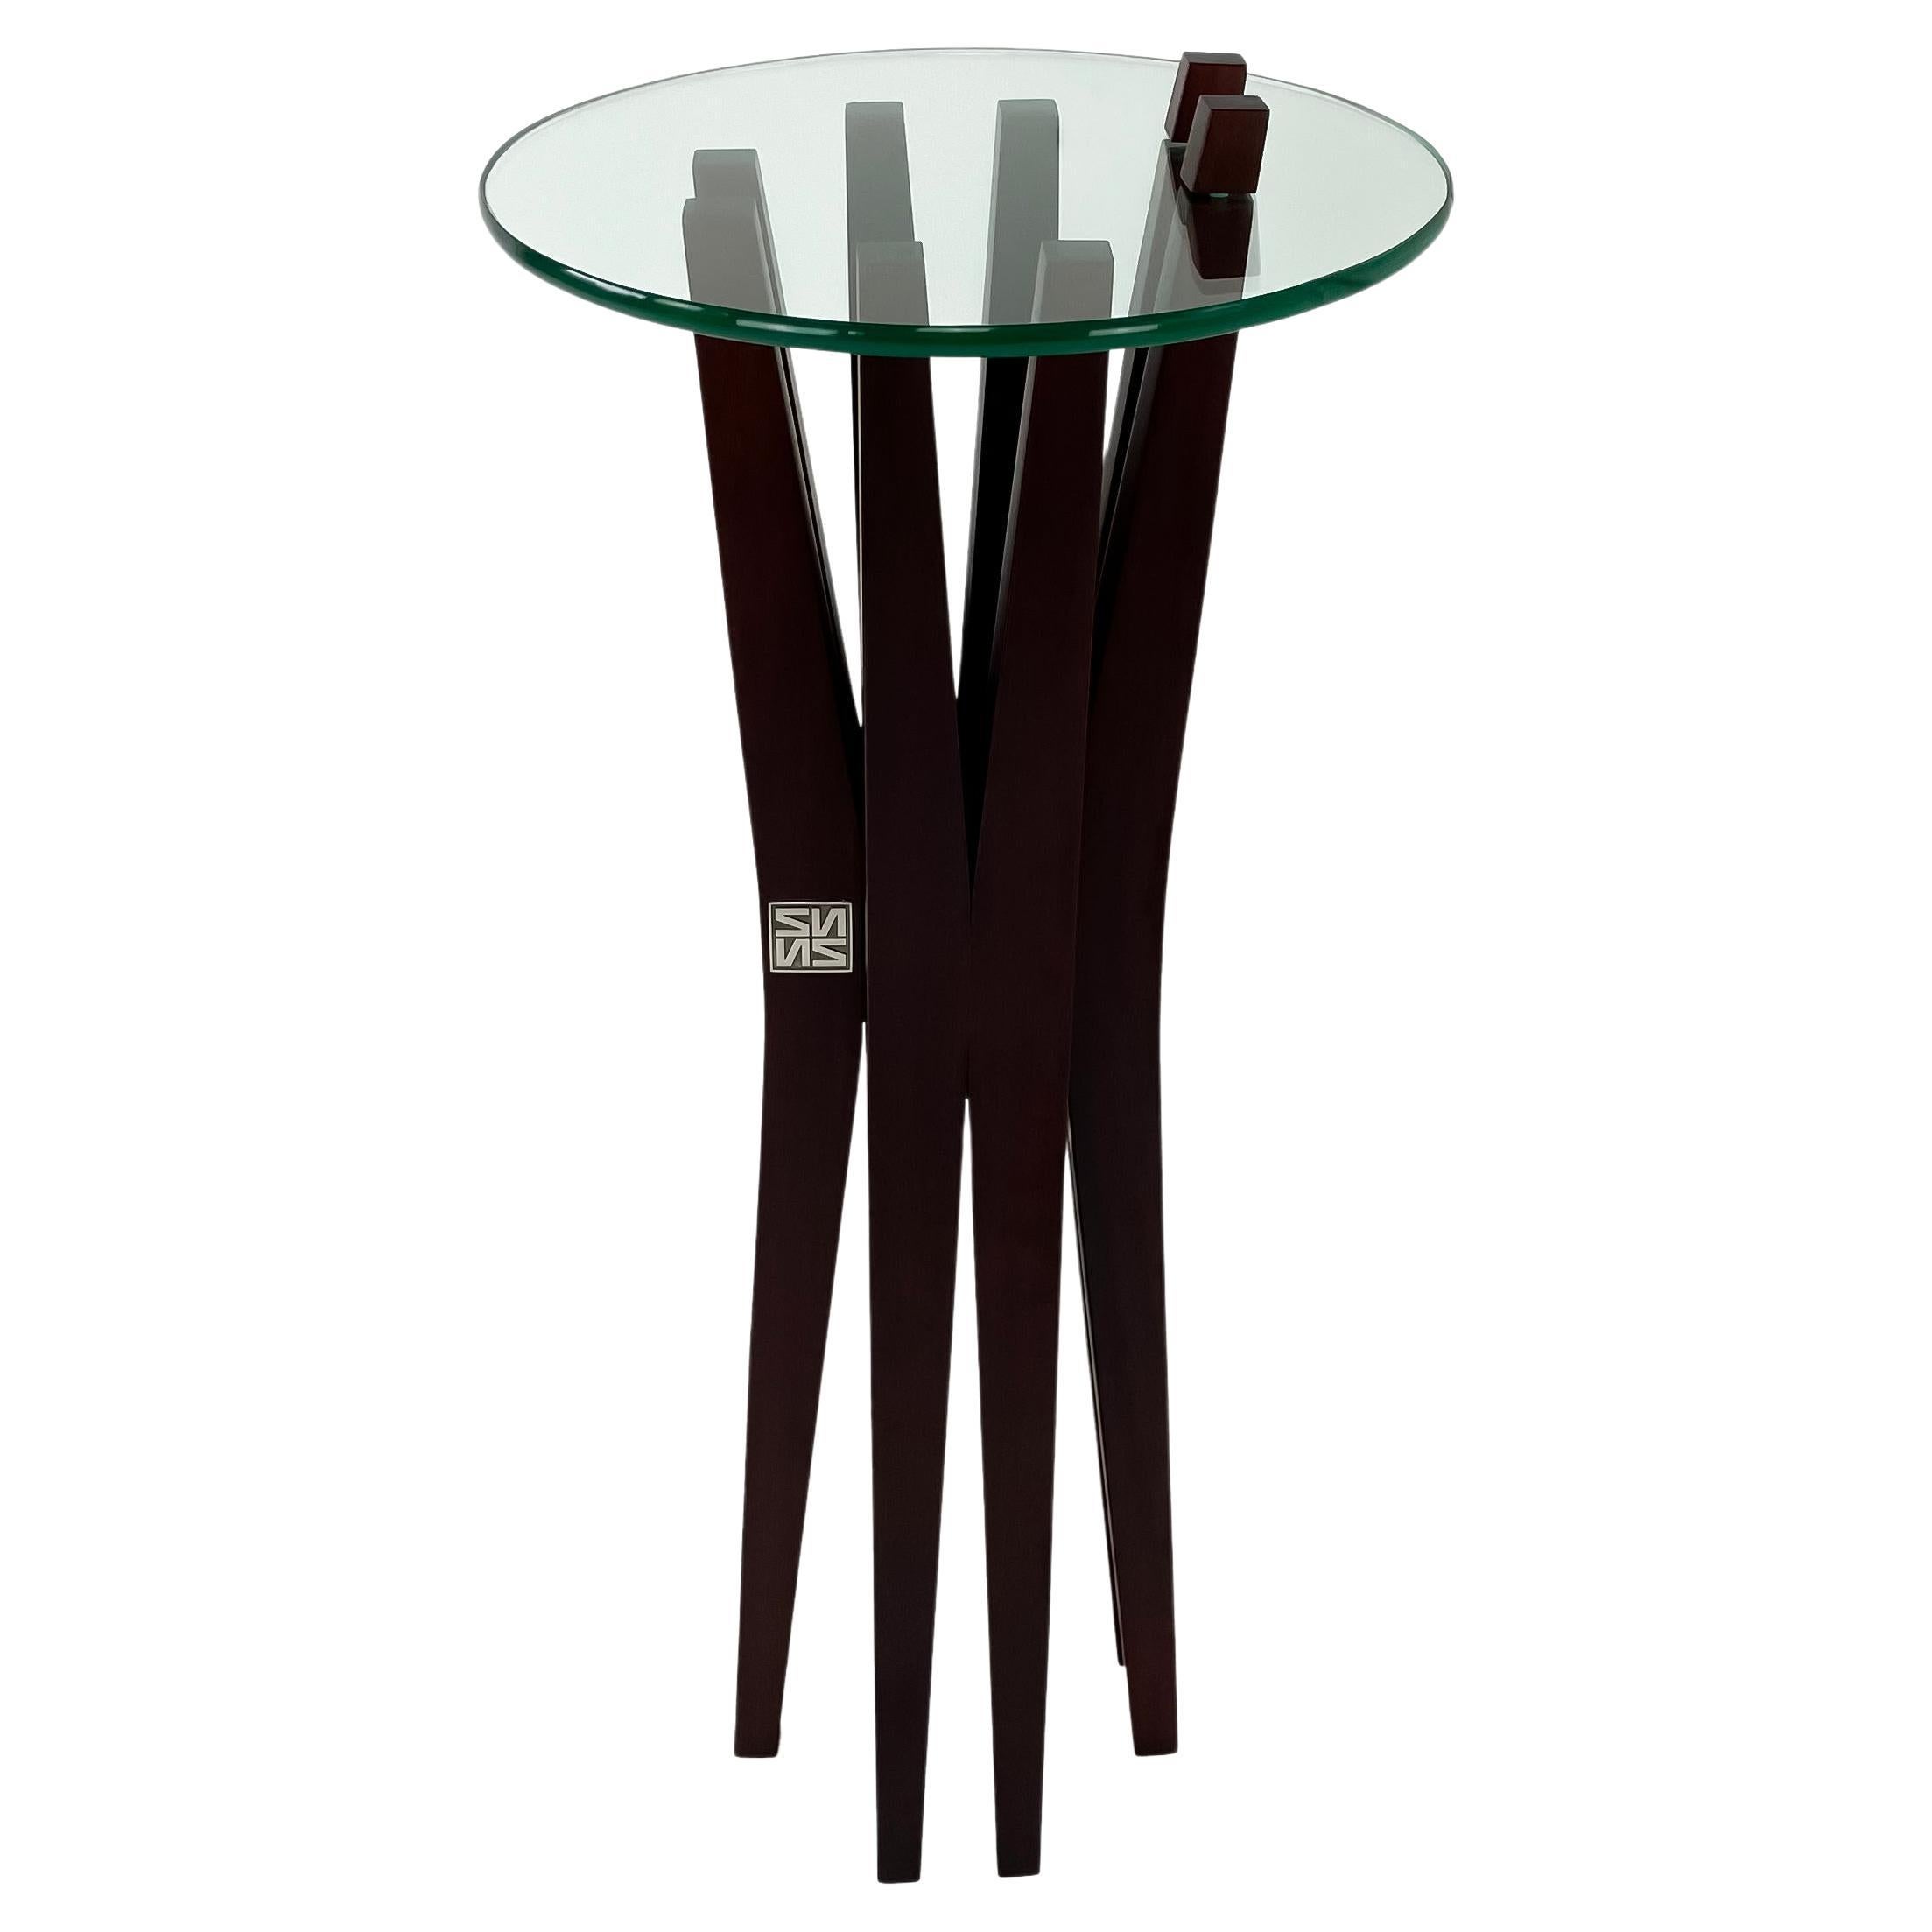 Modern Solid Wood and Glass Pedestal Table by Pierre Sarkis For Sale